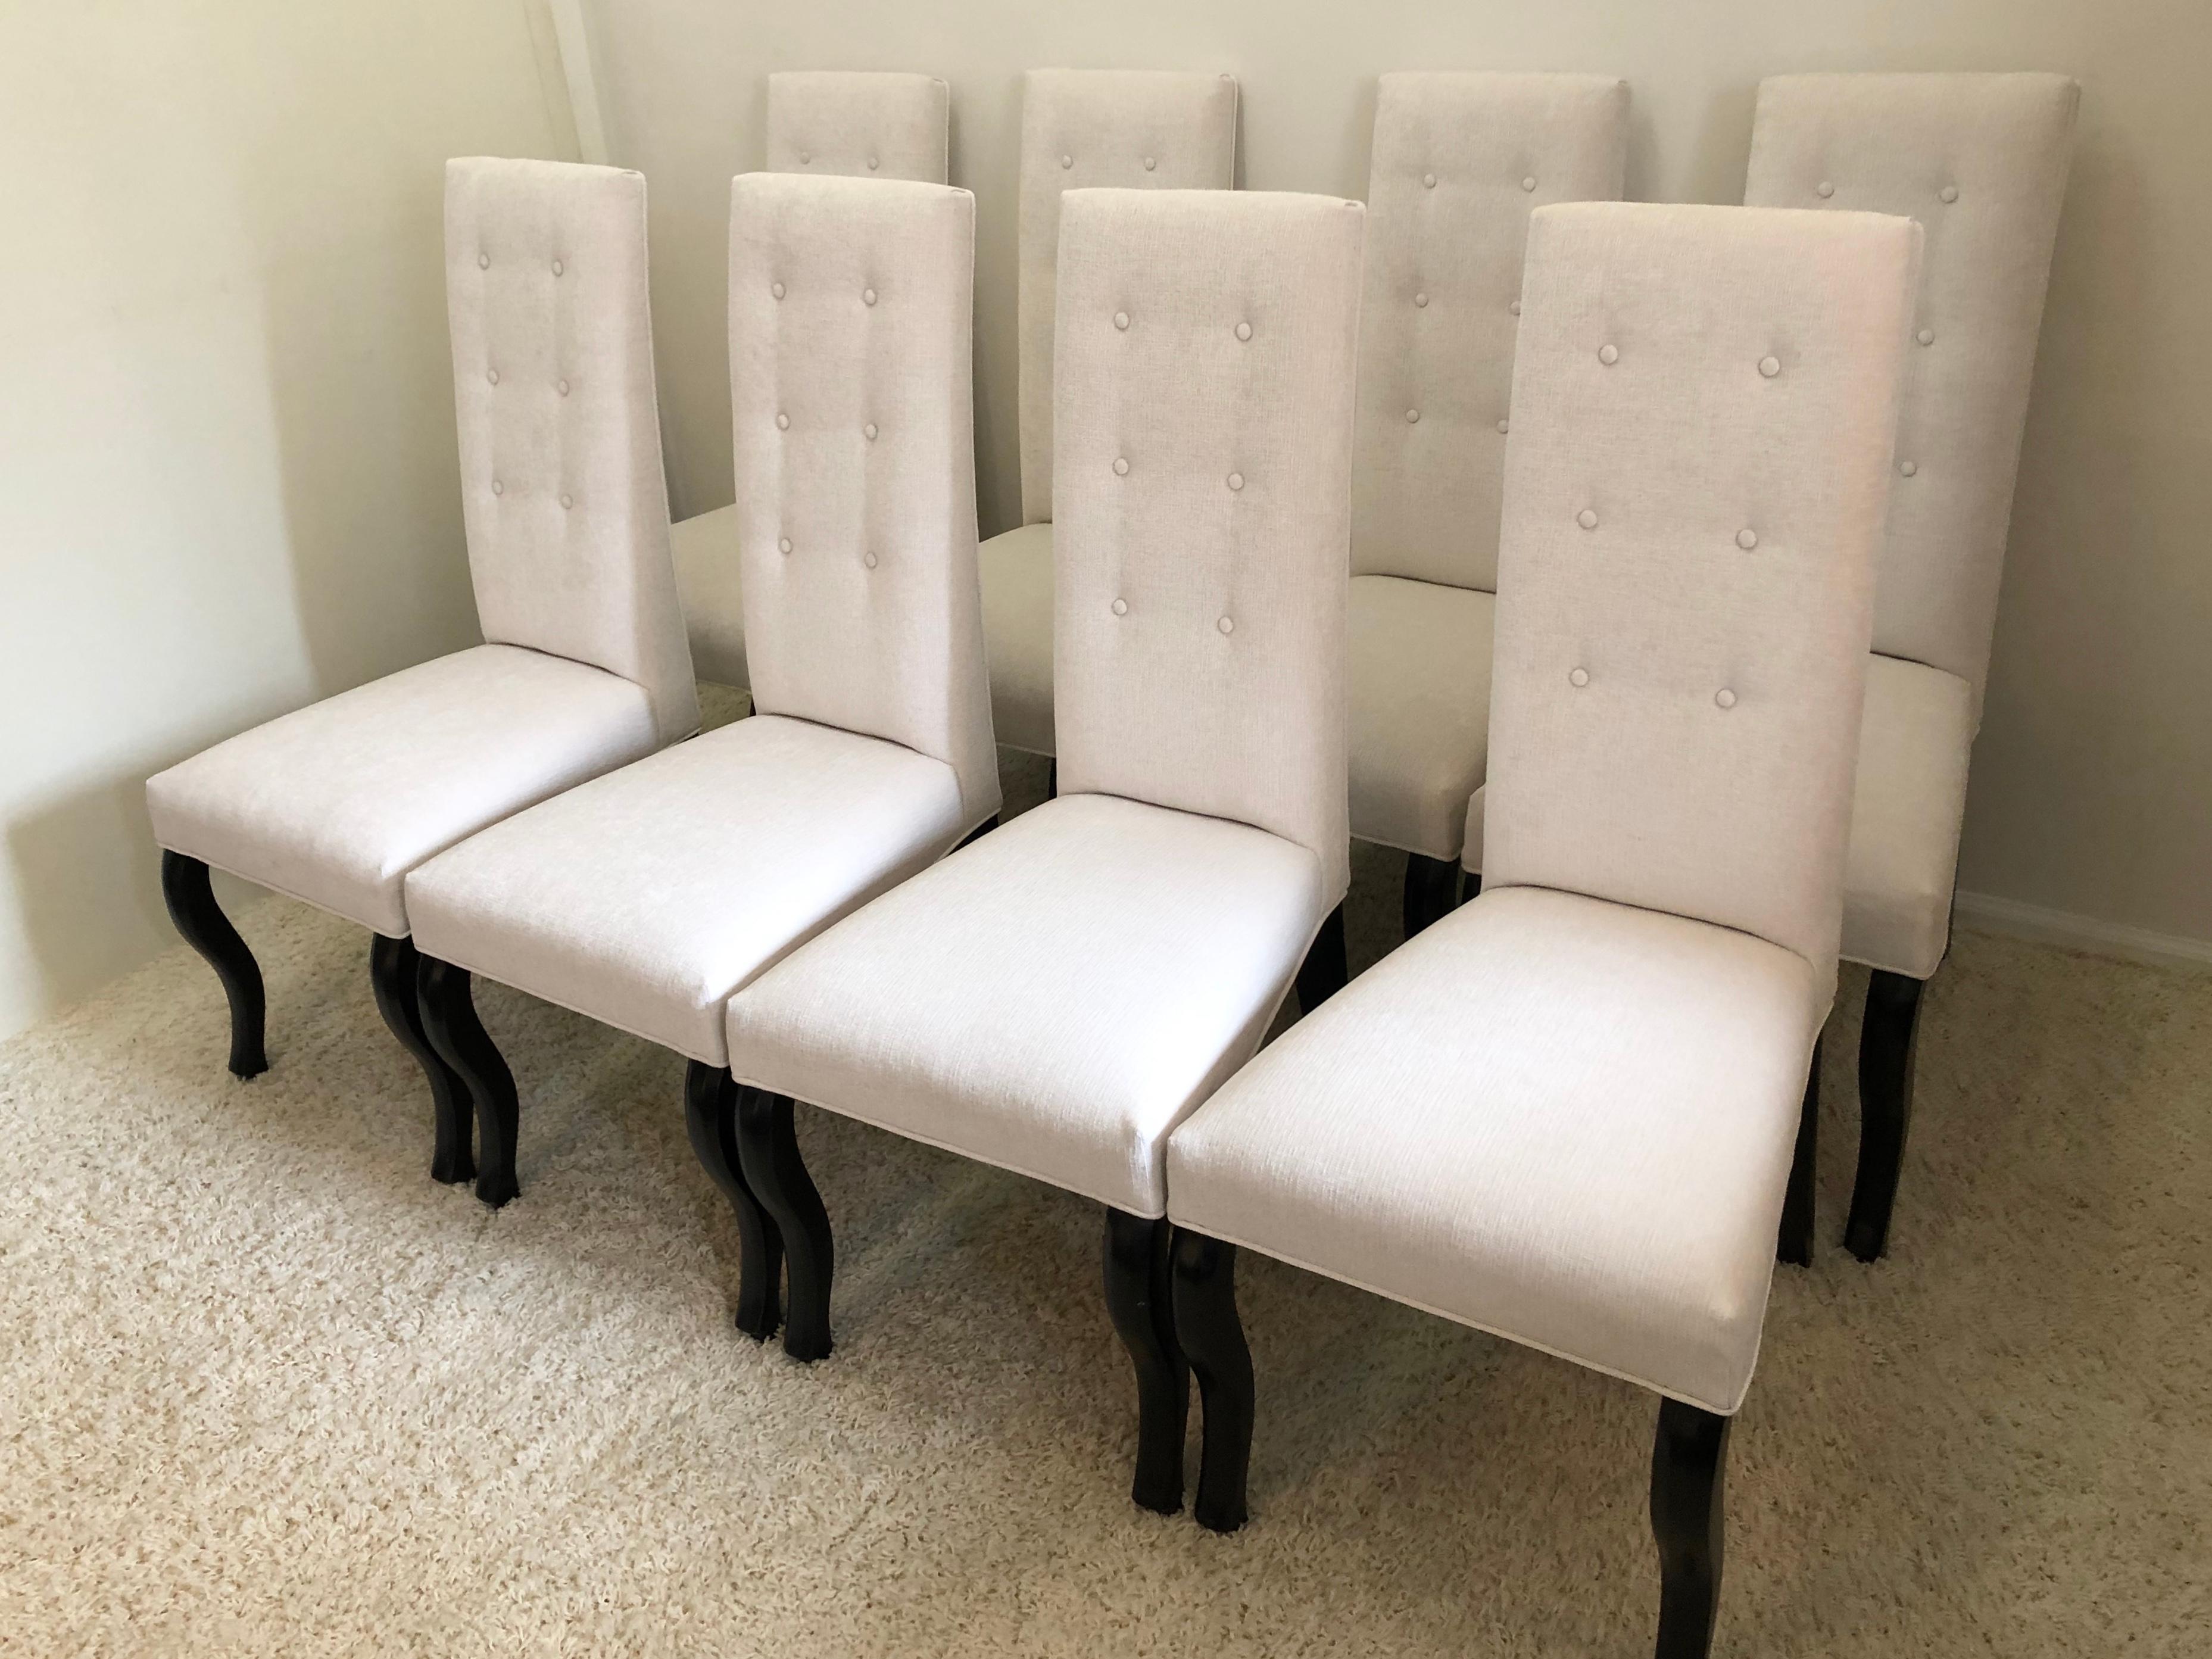 cleopatra chairs